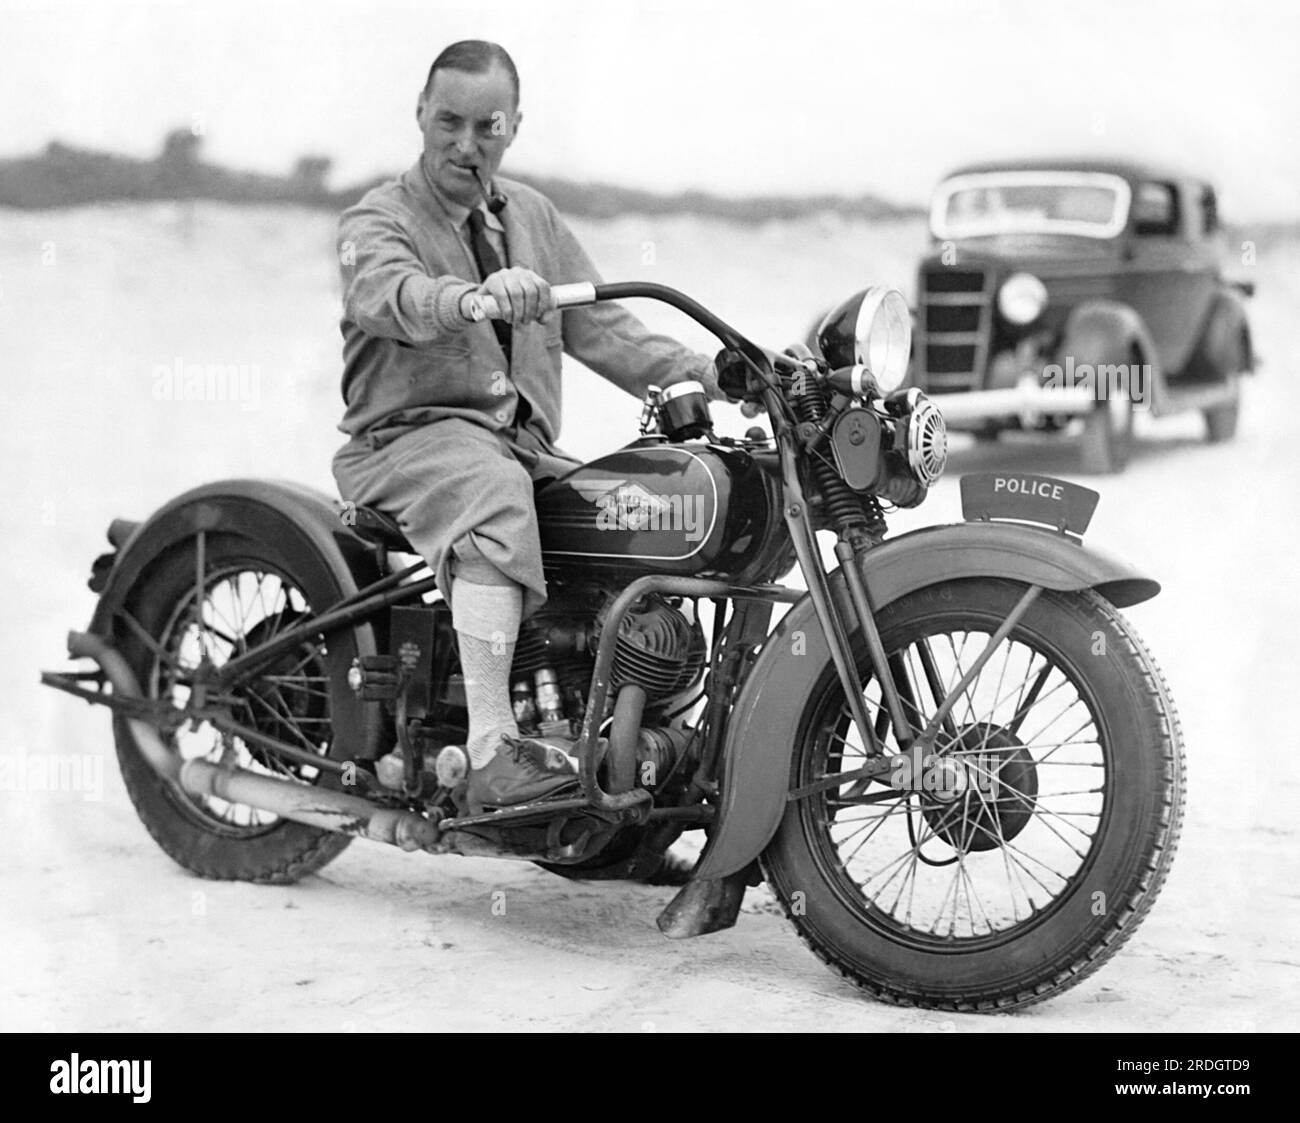 Daytona Beach, Florida:  February 13, 1935 British racer Captain Malcolm Campbell tries out a policeman's Harley Davidson, but he won't get near the 300 mph he hopes to reach in his Bluebird race car on the beach. Stock Photo